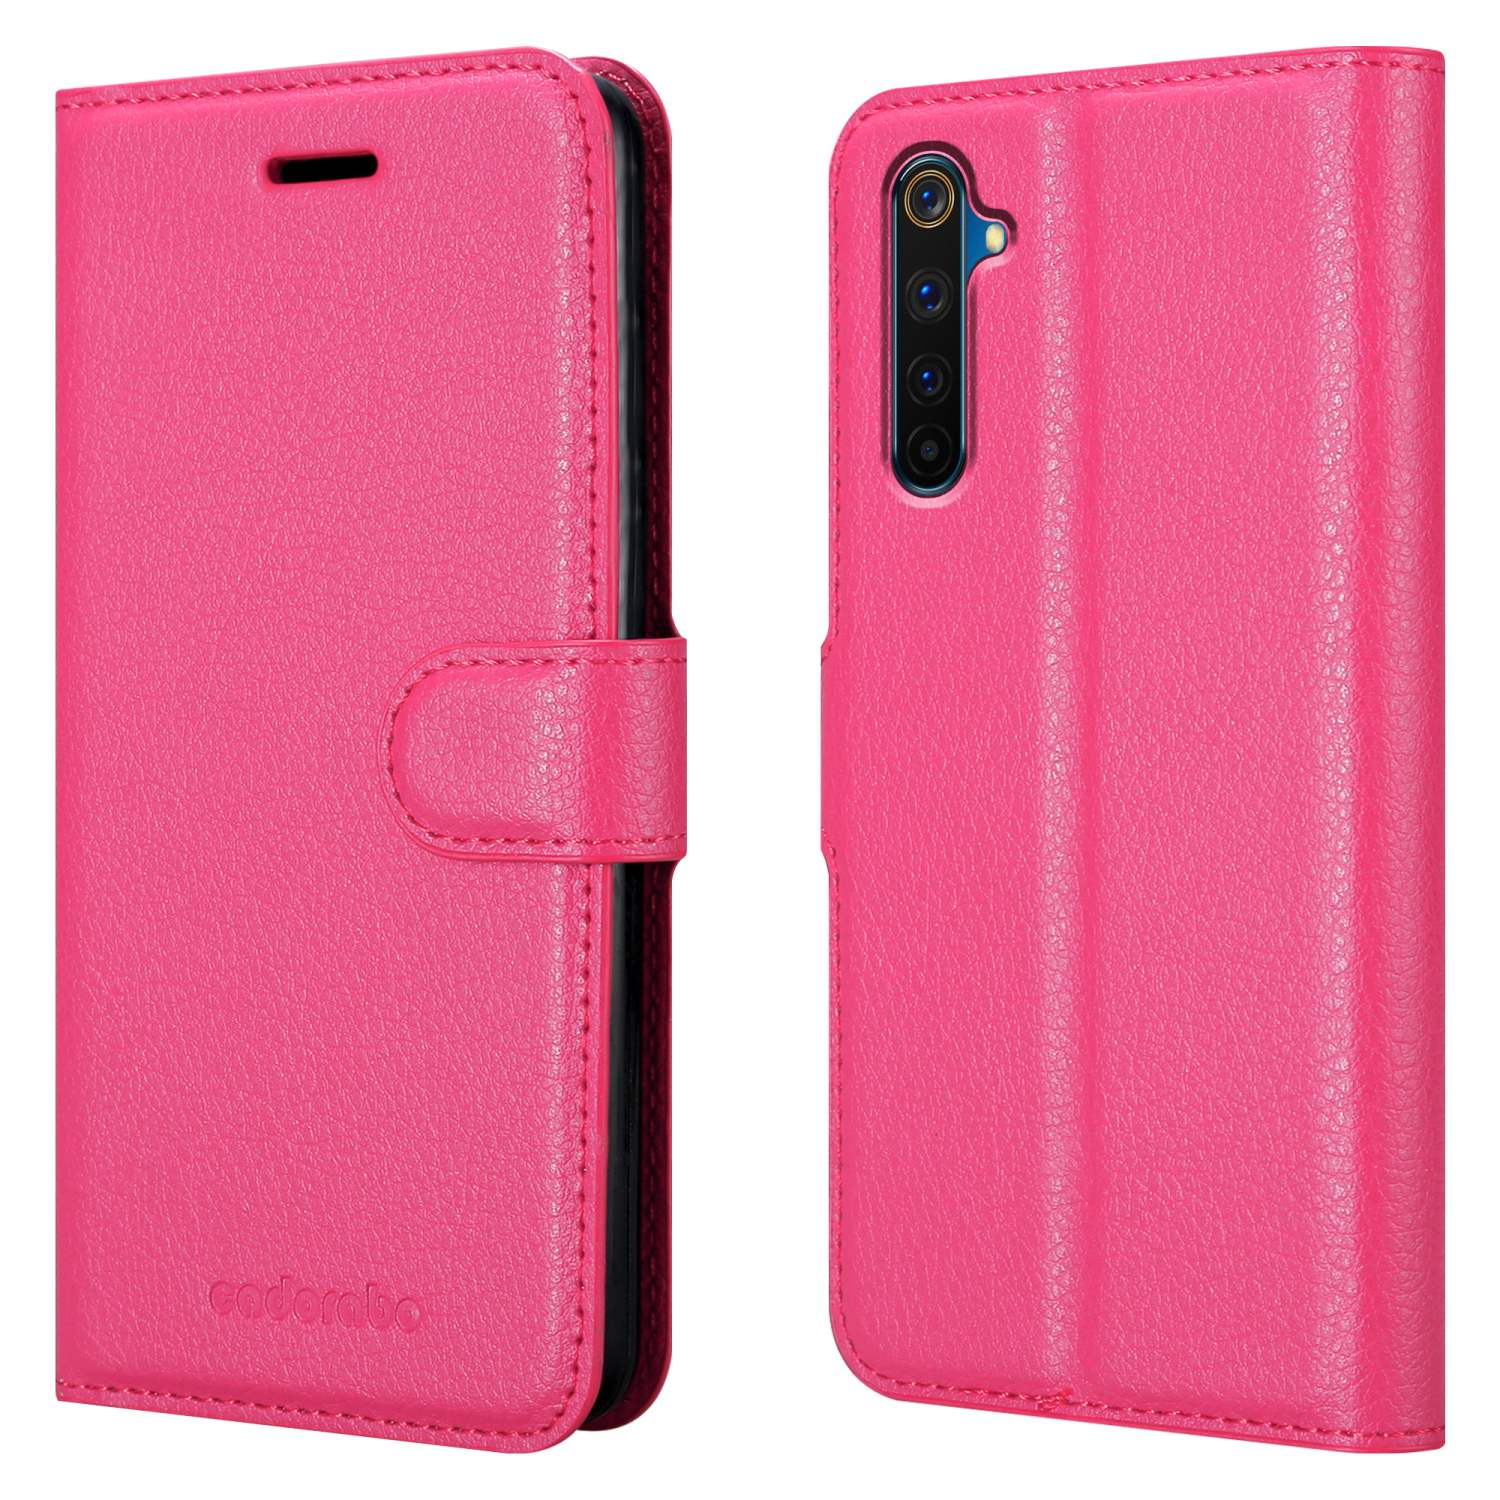 PRO, Bookcover, Realme, 6 PINK Standfunktion, Hülle CHERRY Book CADORABO